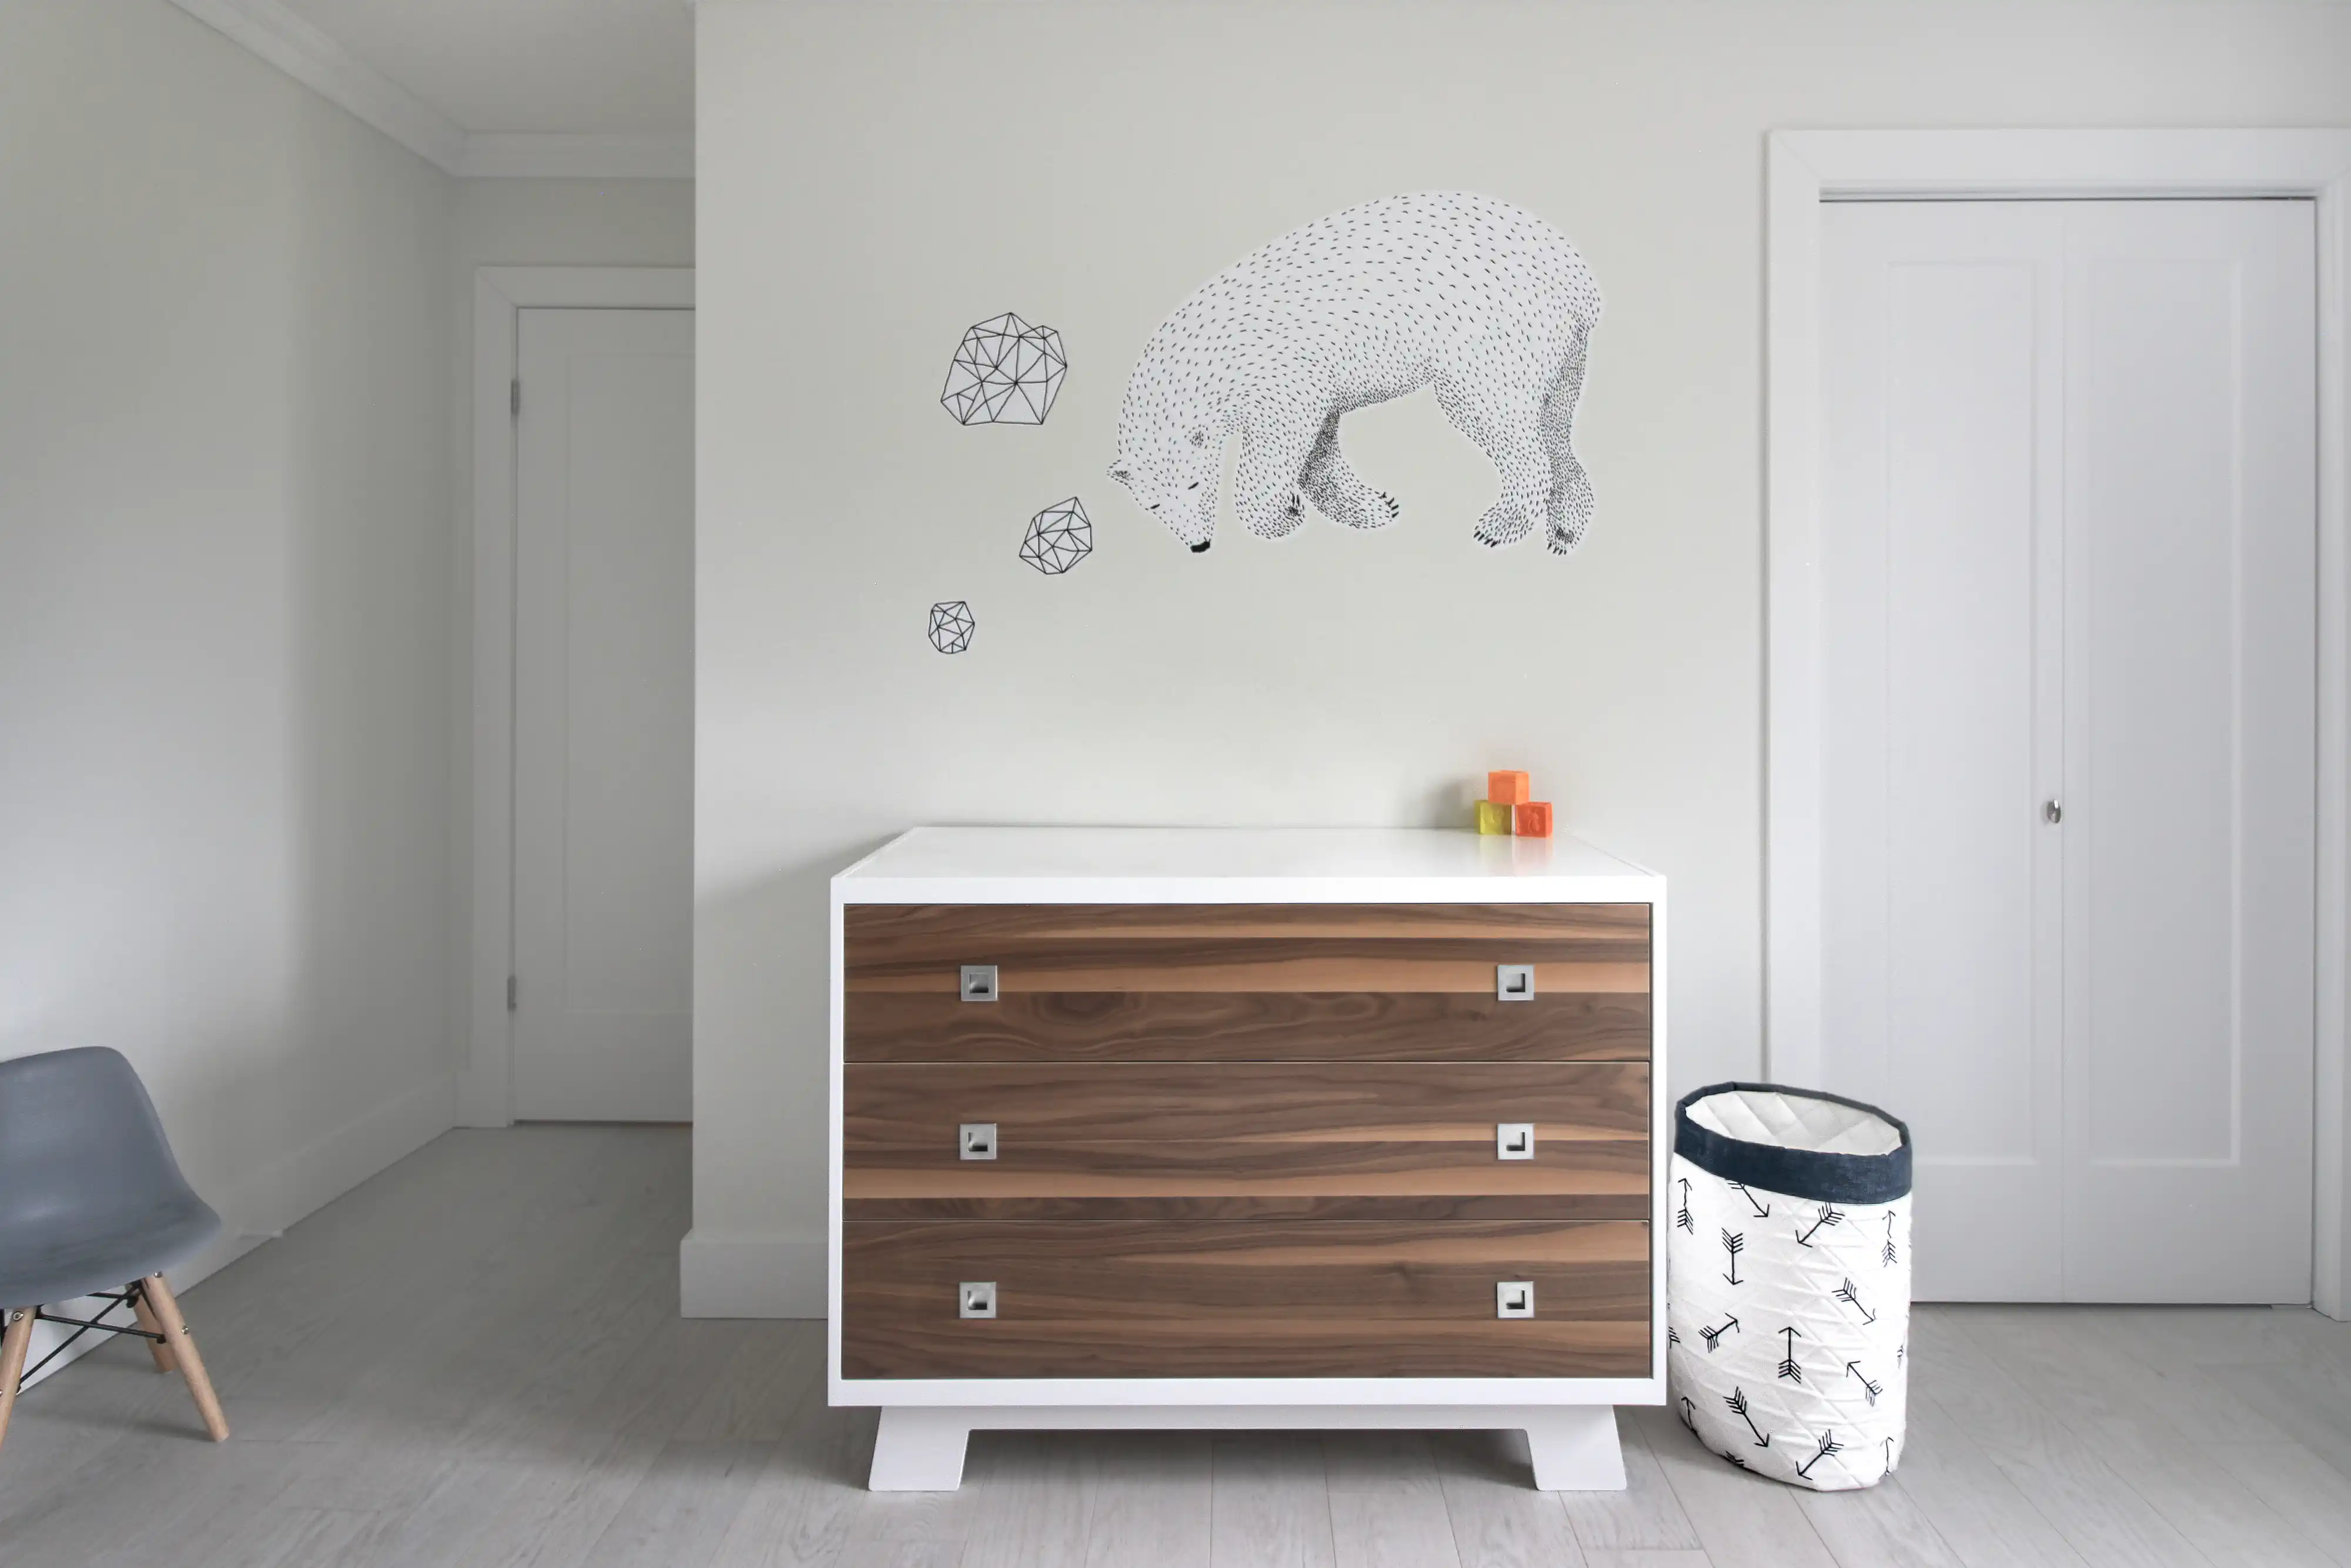 Modern bedroom with a wooden dresser, a blue chair, and a wall with a black geometric bear design, interior by Sarah Brown Design